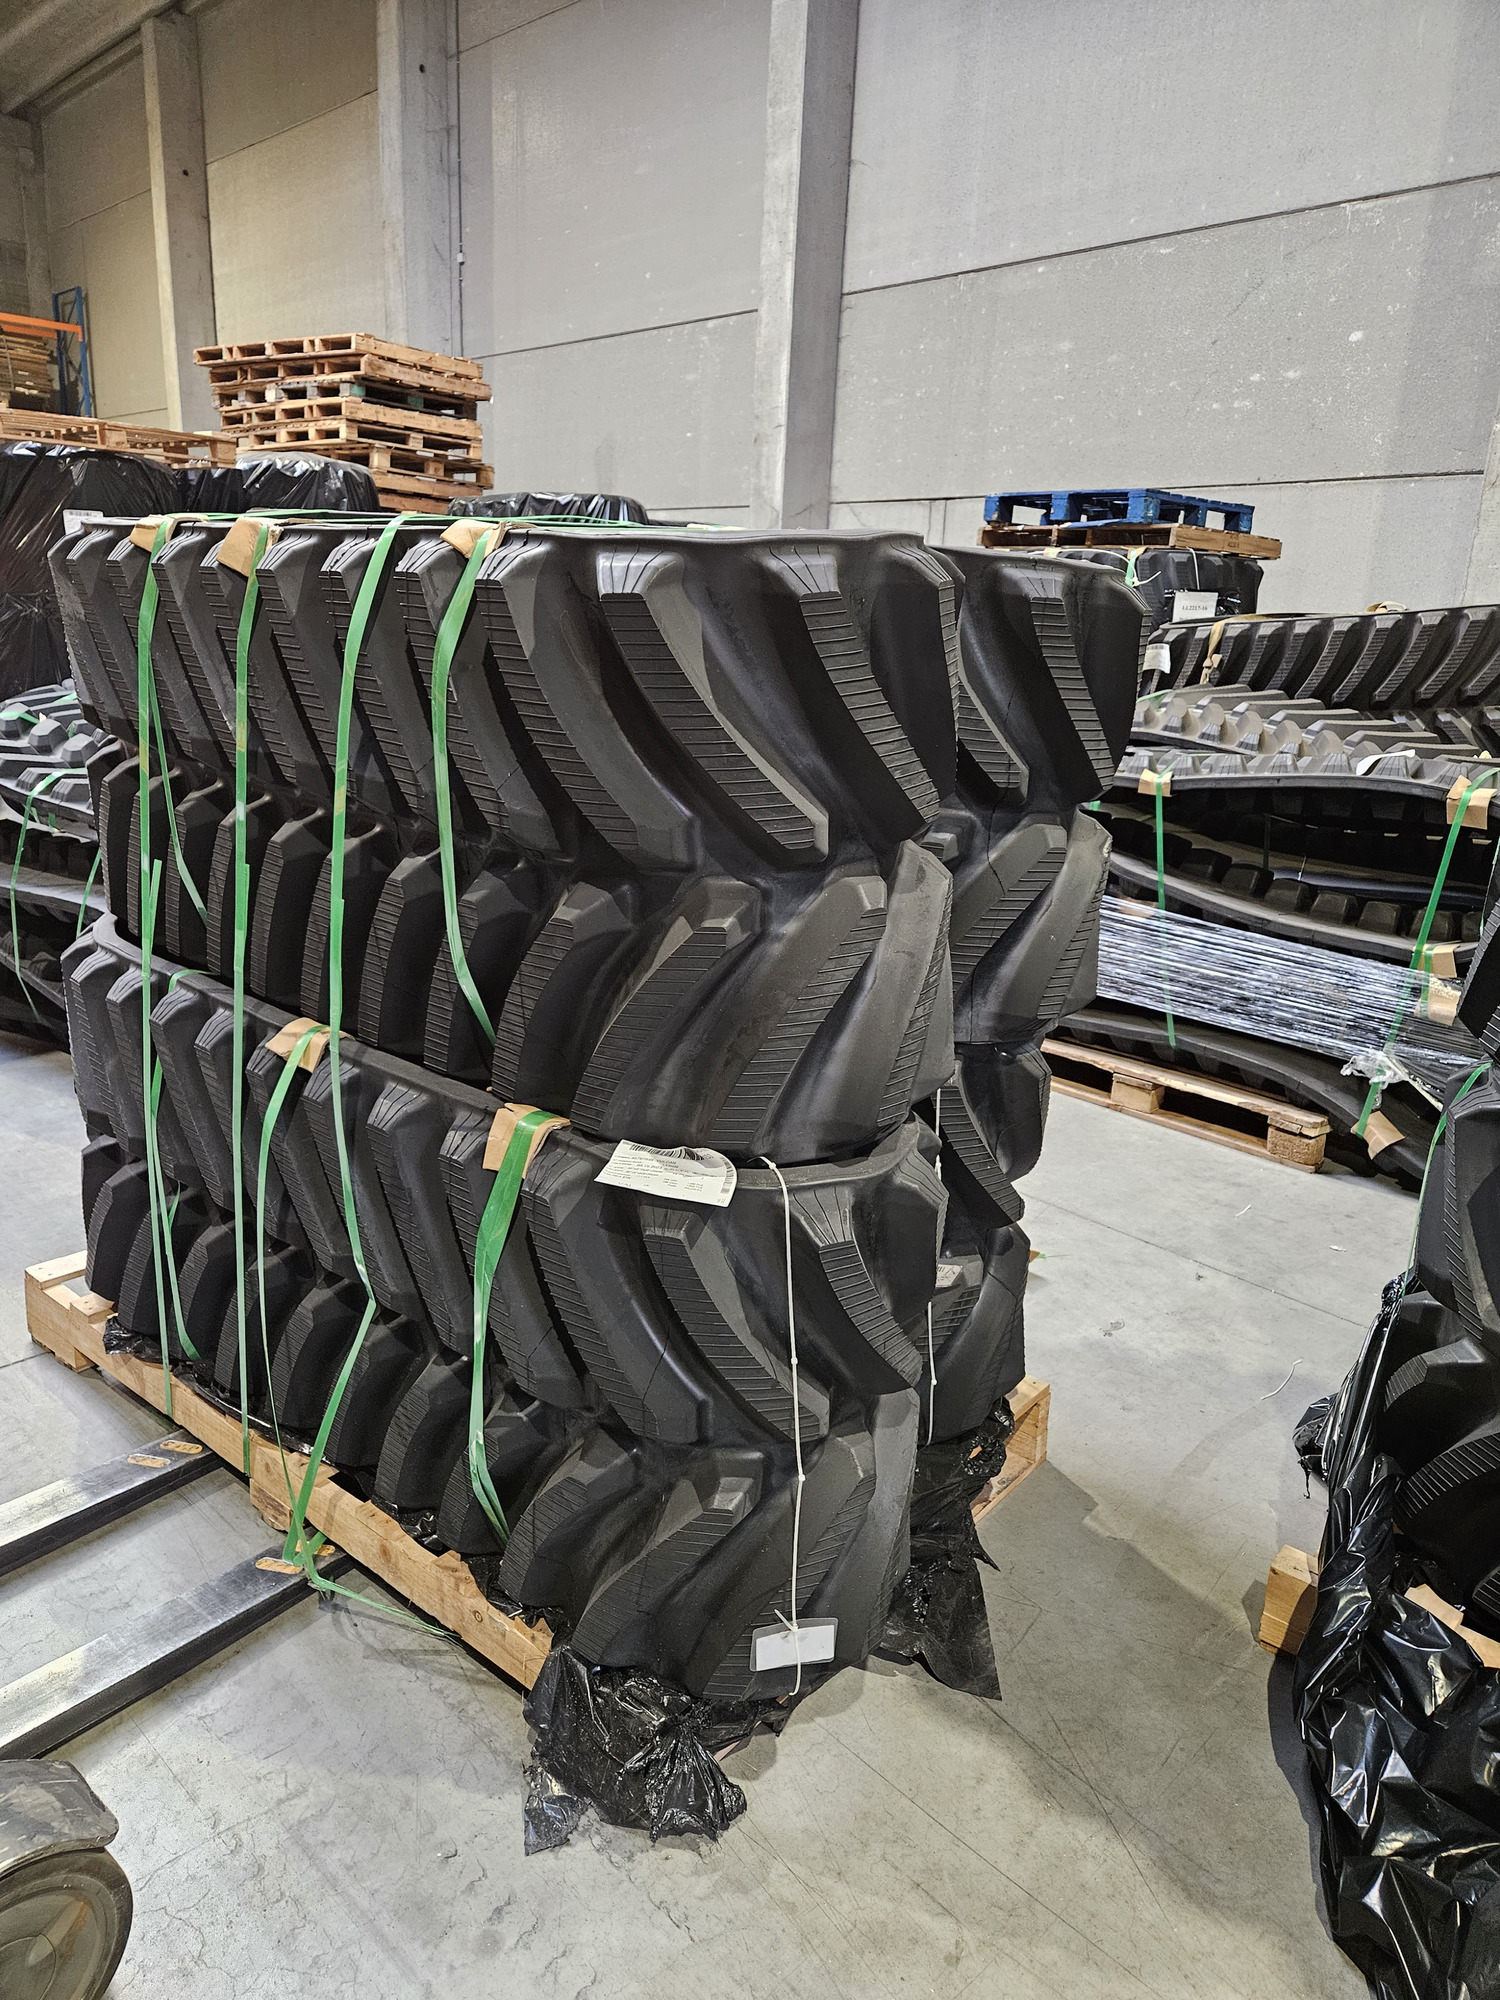 STE LEACH LEWIS RUBBER TRACKS LIMITED undefined: kuva STE LEACH LEWIS RUBBER TRACKS LIMITED undefined